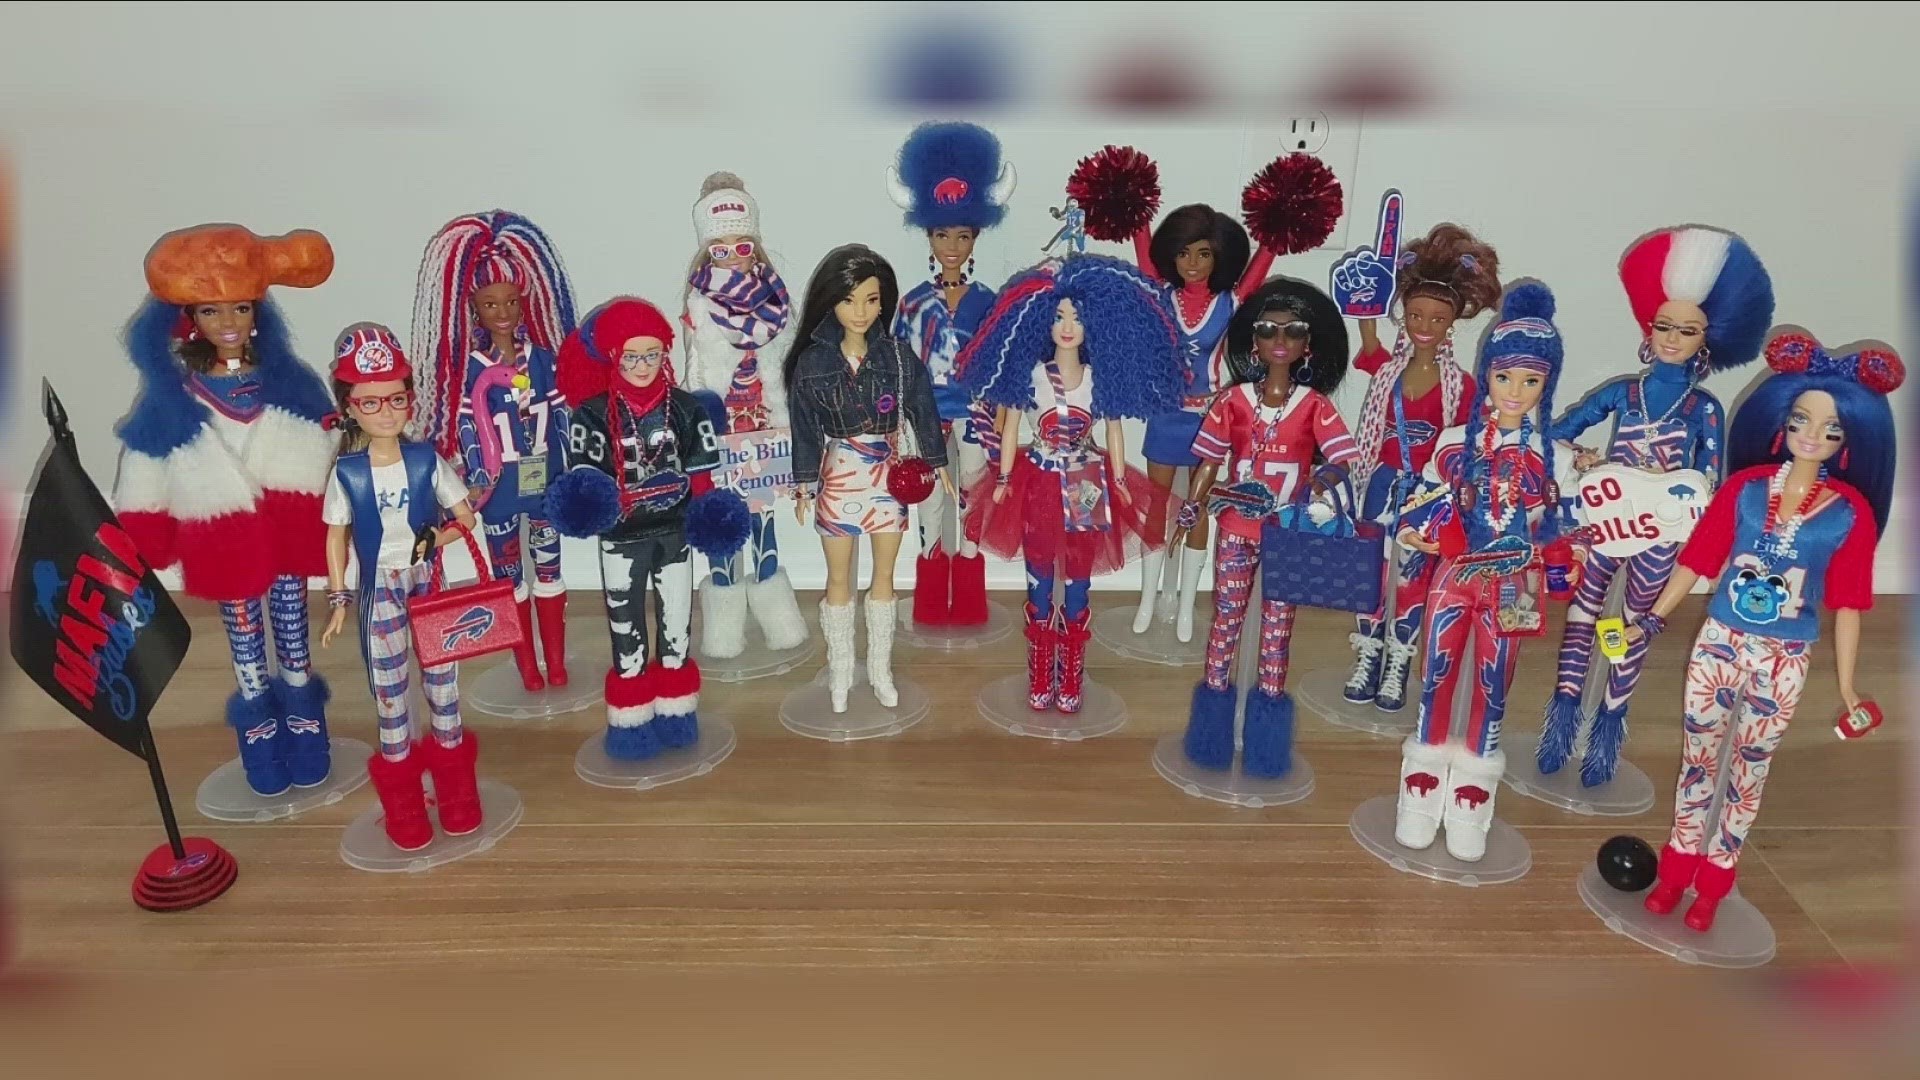 the water buffalo club 7-1-6 is making sure of that today, they are unveiling a bills-themed Barbie collection.